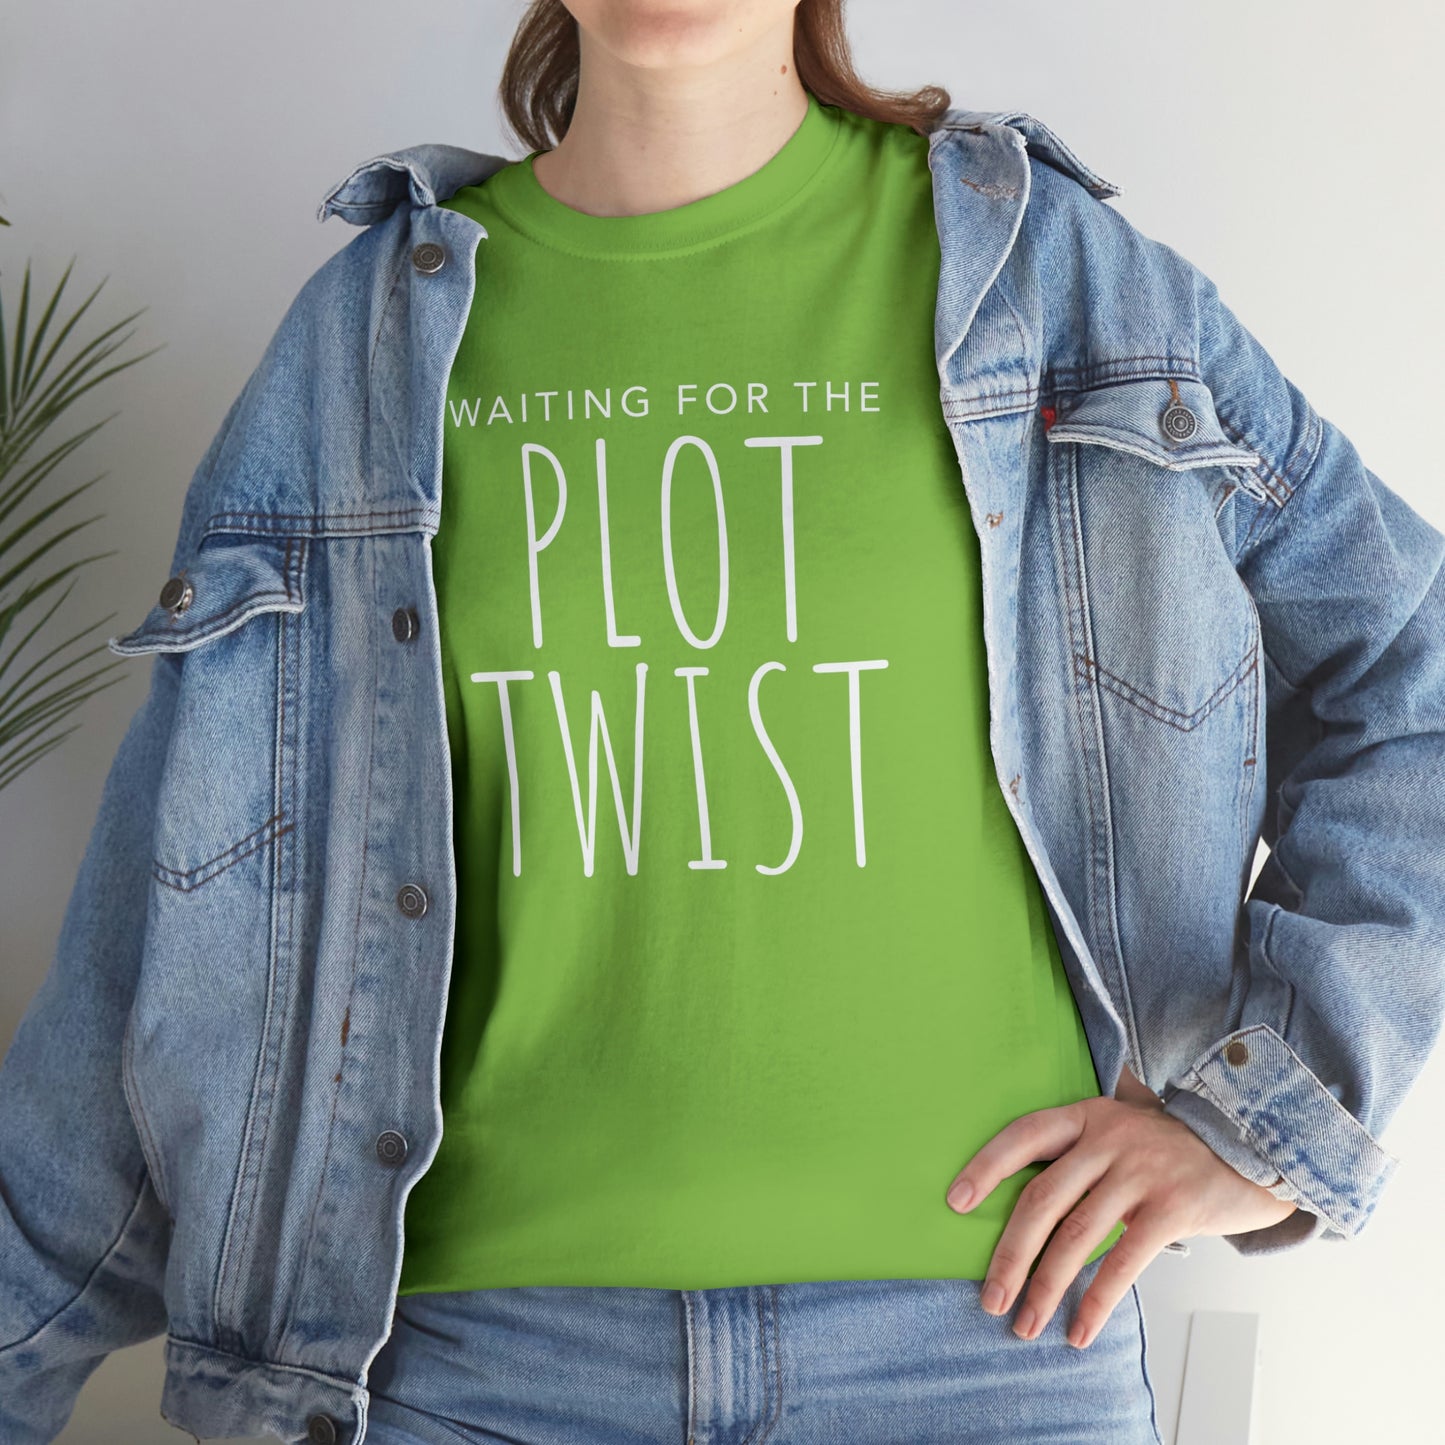 Waiting For The Plot Twist - Cotton Tee